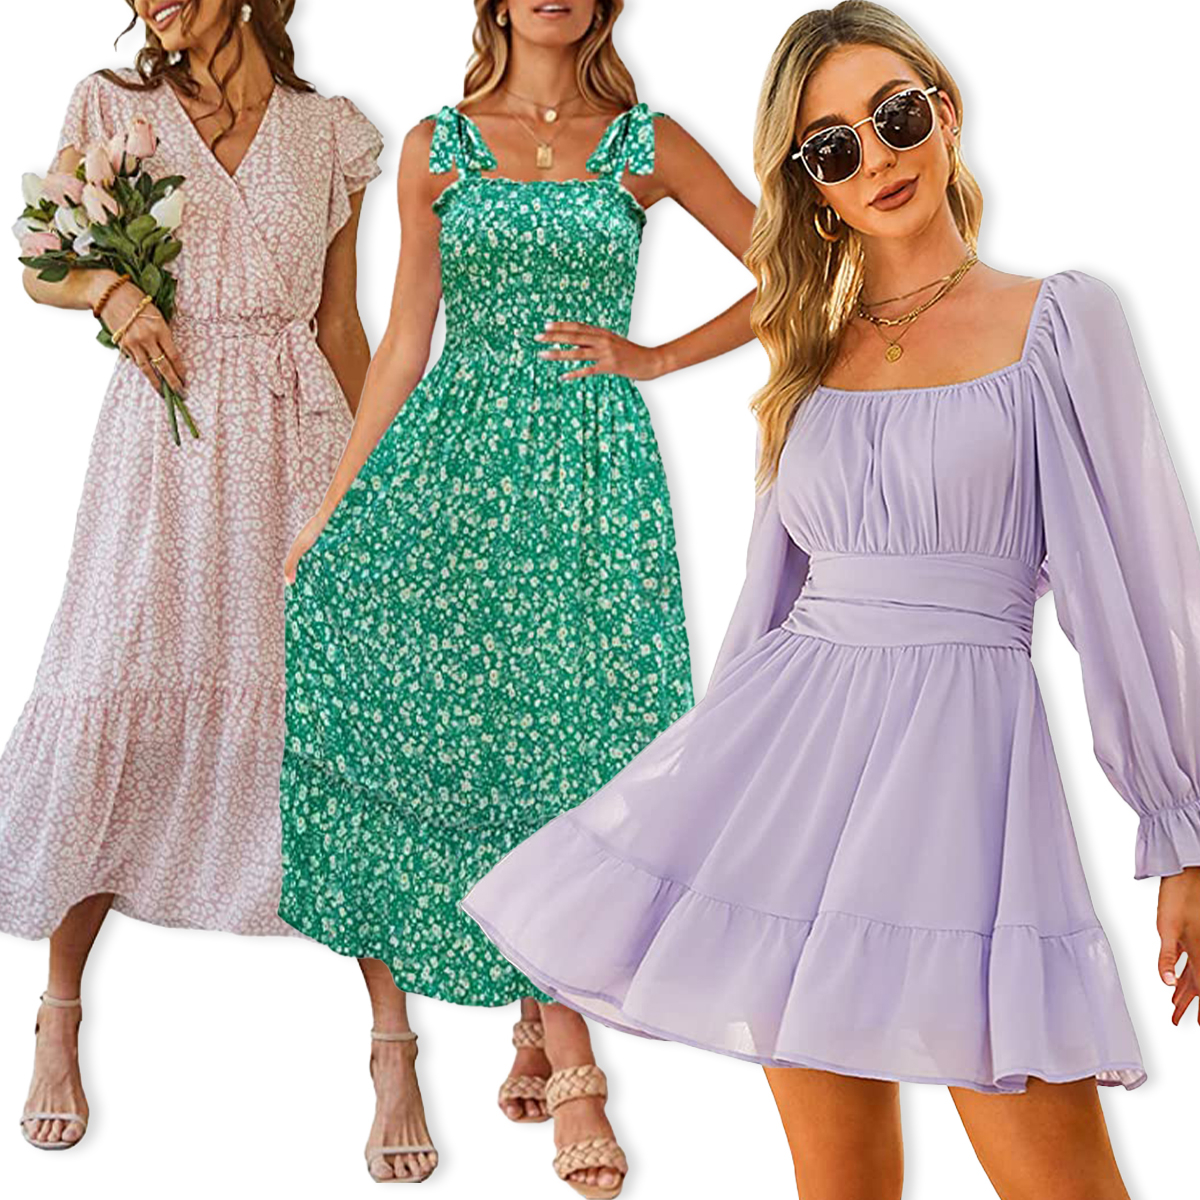 30 Cute Spring Dresses Under $30  Affordable Fashion - Glamour and Gains